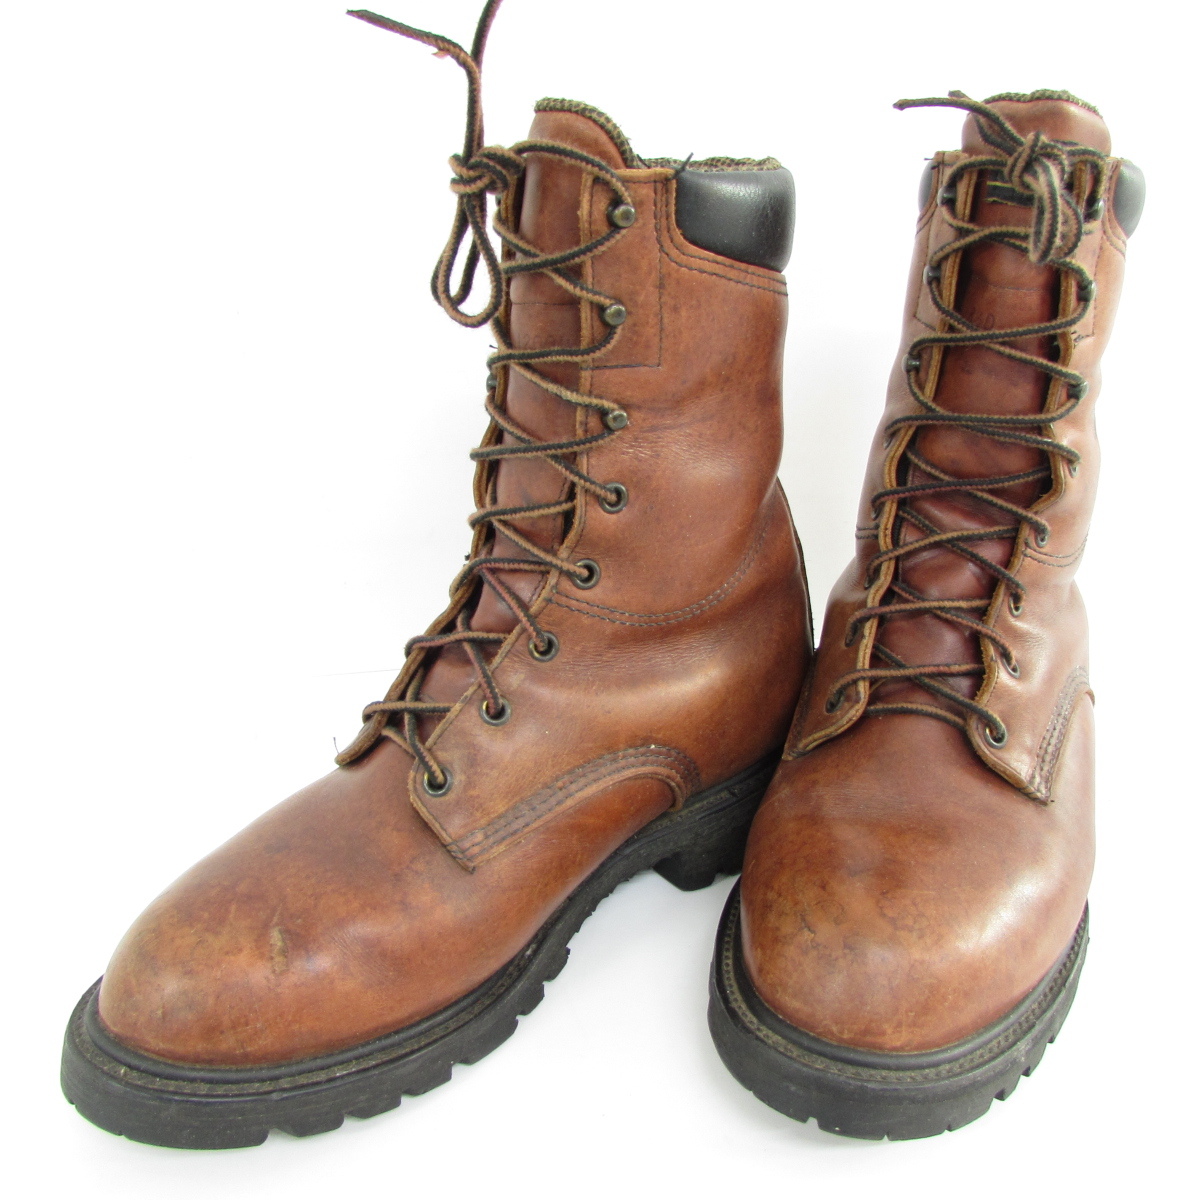 RED WING レッドウィング GORE-TEX BOOTS 1229 SIZE:8.5D ブーツ ▼SH6006_画像1